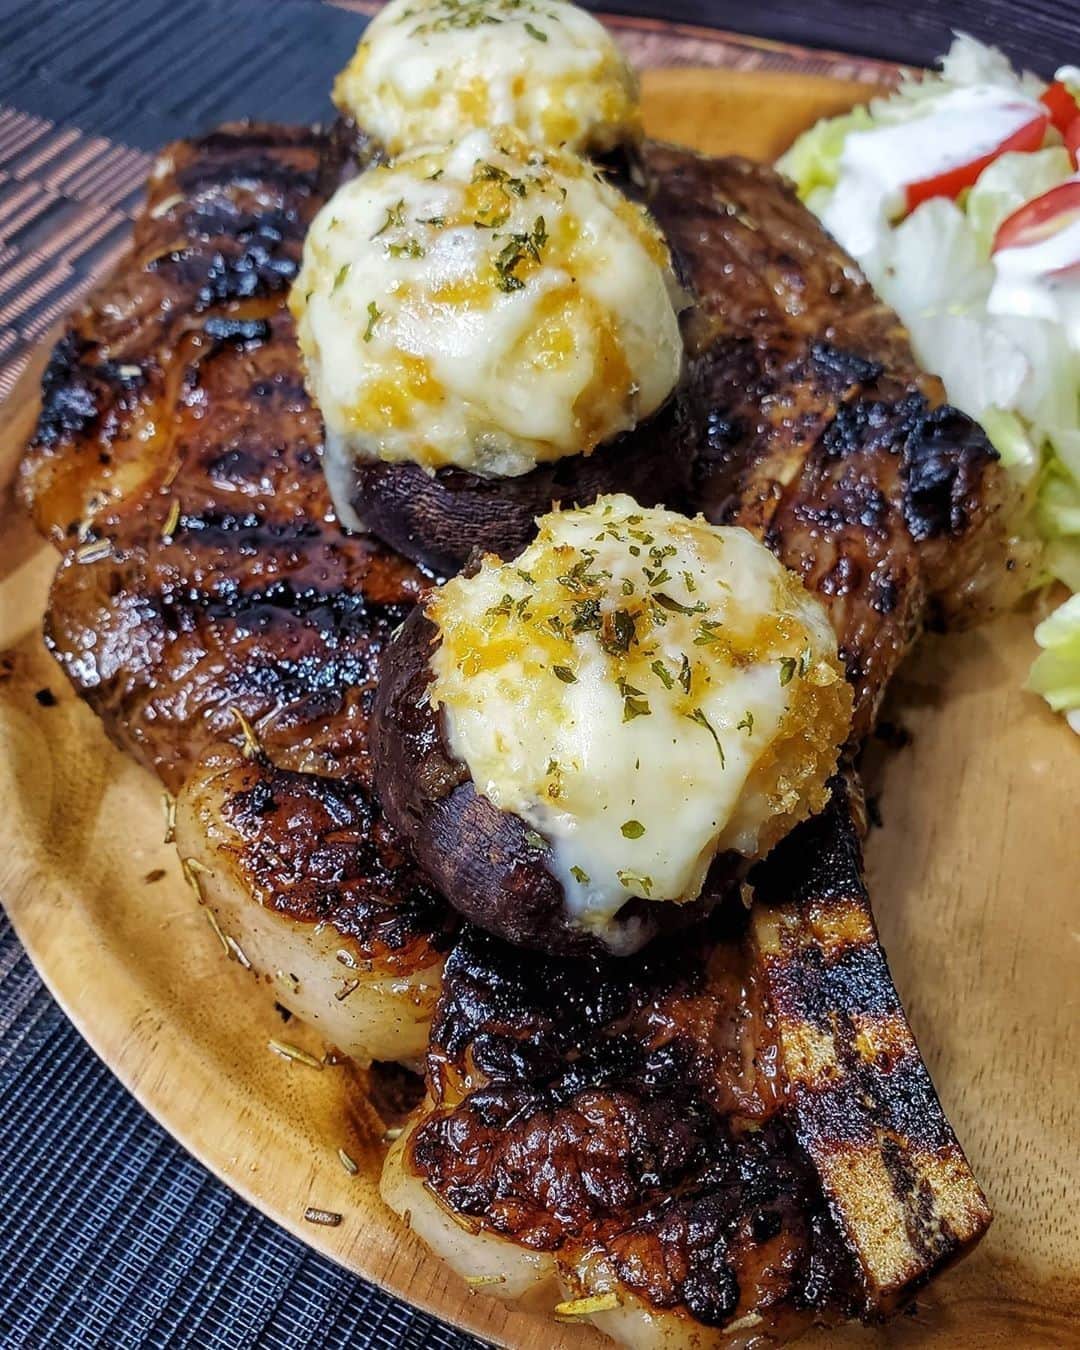 Flavorgod Seasoningsさんのインスタグラム写真 - (Flavorgod SeasoningsInstagram)「Big Ass Bone in Ribeye w/Crab Stuffed Mushrooms⁠ -⁠ Customer:👉 @ketobrawn⁠ Seasoned with:👉 #Flavorgod pink salt and peppercorn⁠ -⁠ KETO friendly flavors available here ⬇️⁠ Click link in the bio -> @flavorgod⁠ www.flavorgod.com⁠ -⁠ Saturday nights are made for good food and good vibes. The name says it all, this ribeye ( seasoned with @flavorgod steak rub and Italian Zest ) is 1.5lbs seared in a HOT cast iron for about 4 minutes a side and done⁠ The stuffed mushrooms......⁠ Preheat oven to 400°⁠ ⁠ 12 whole mushrooms⁠ 8oz lump crab meat⁠ 4oz cream cheese⁠ 1/4 cup shredded cheddar⁠ 1/4 cup mozzarella⁠ 1/4 cup parmesan⁠ 1/2 cup minced onion⁠ 1 tbsp minced garlic⁠ 2 tbsp melted butter⁠ Salt pepper to taste, we use @flavorgod pink salt and peppercorn⁠ ⁠ 1) Soften cream cheese , sautè the onion til just colored then add the garlic to bloom. Put into a med bowl. Add cream cheese and the rest of ingredients.⁠ 2) Take mushrooms stems off with your fingers and wash. Stuff with crab mixture. Brush with melted butter. Sprinkle with @porkkinggood panko. Add just a bit of oil to your oven safe dish of choice ( we used our cast iron skillet ) put the shrooms in and bake for 20 minutes.⁠ You can spinkle with mozzarella after they are done, baste with butter, whatever you like.. Happy Saturday Brawnies !!!! ❤❤❤⁠ -⁠ Flavor God Seasonings are:⁠ 💥ZERO CALORIES PER SERVING⁠ 🔥0 SUGAR PER SERVING ⁠ 💥GLUTEN FREE⁠ 🔥KETO FRIENDLY⁠ 💥PALEO FRIENDLY⁠ -⁠ #food #foodie #flavorgod #seasonings #glutenfree #mealprep #seasonings #breakfast #lunch #dinner #yummy #delicious #foodporn」7月14日 10時01分 - flavorgod